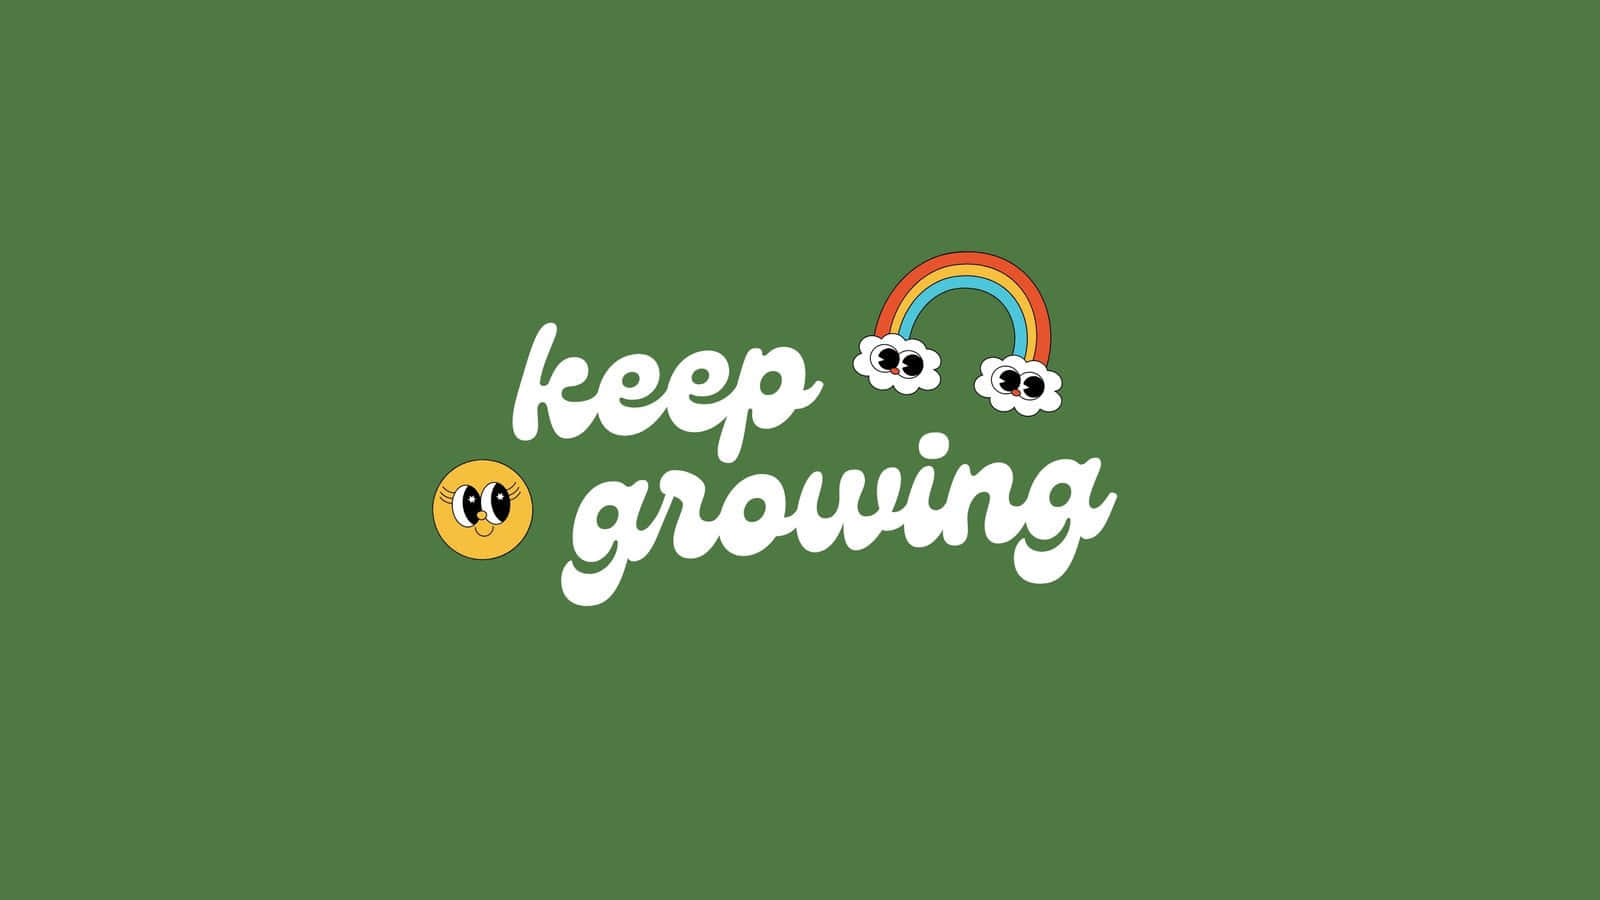 Keep Growing Logo With A Rainbow And A Smiley Face